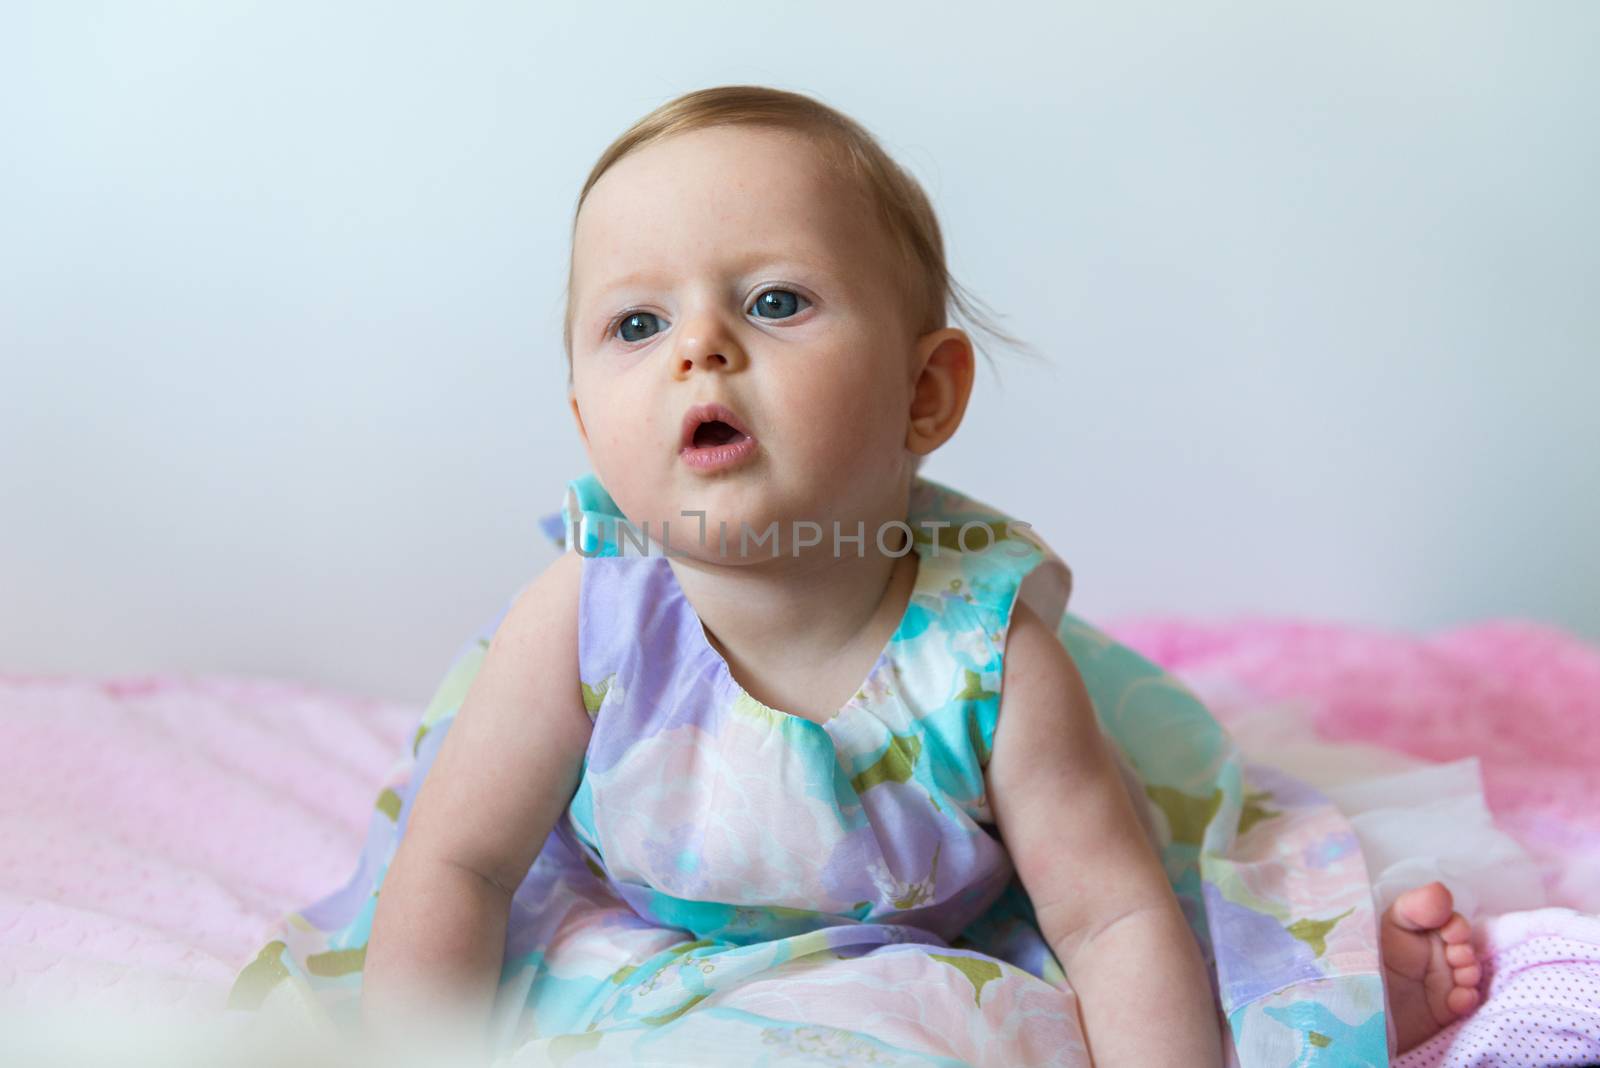 Cute 6 months old baby girl wearing beauty dress on light background